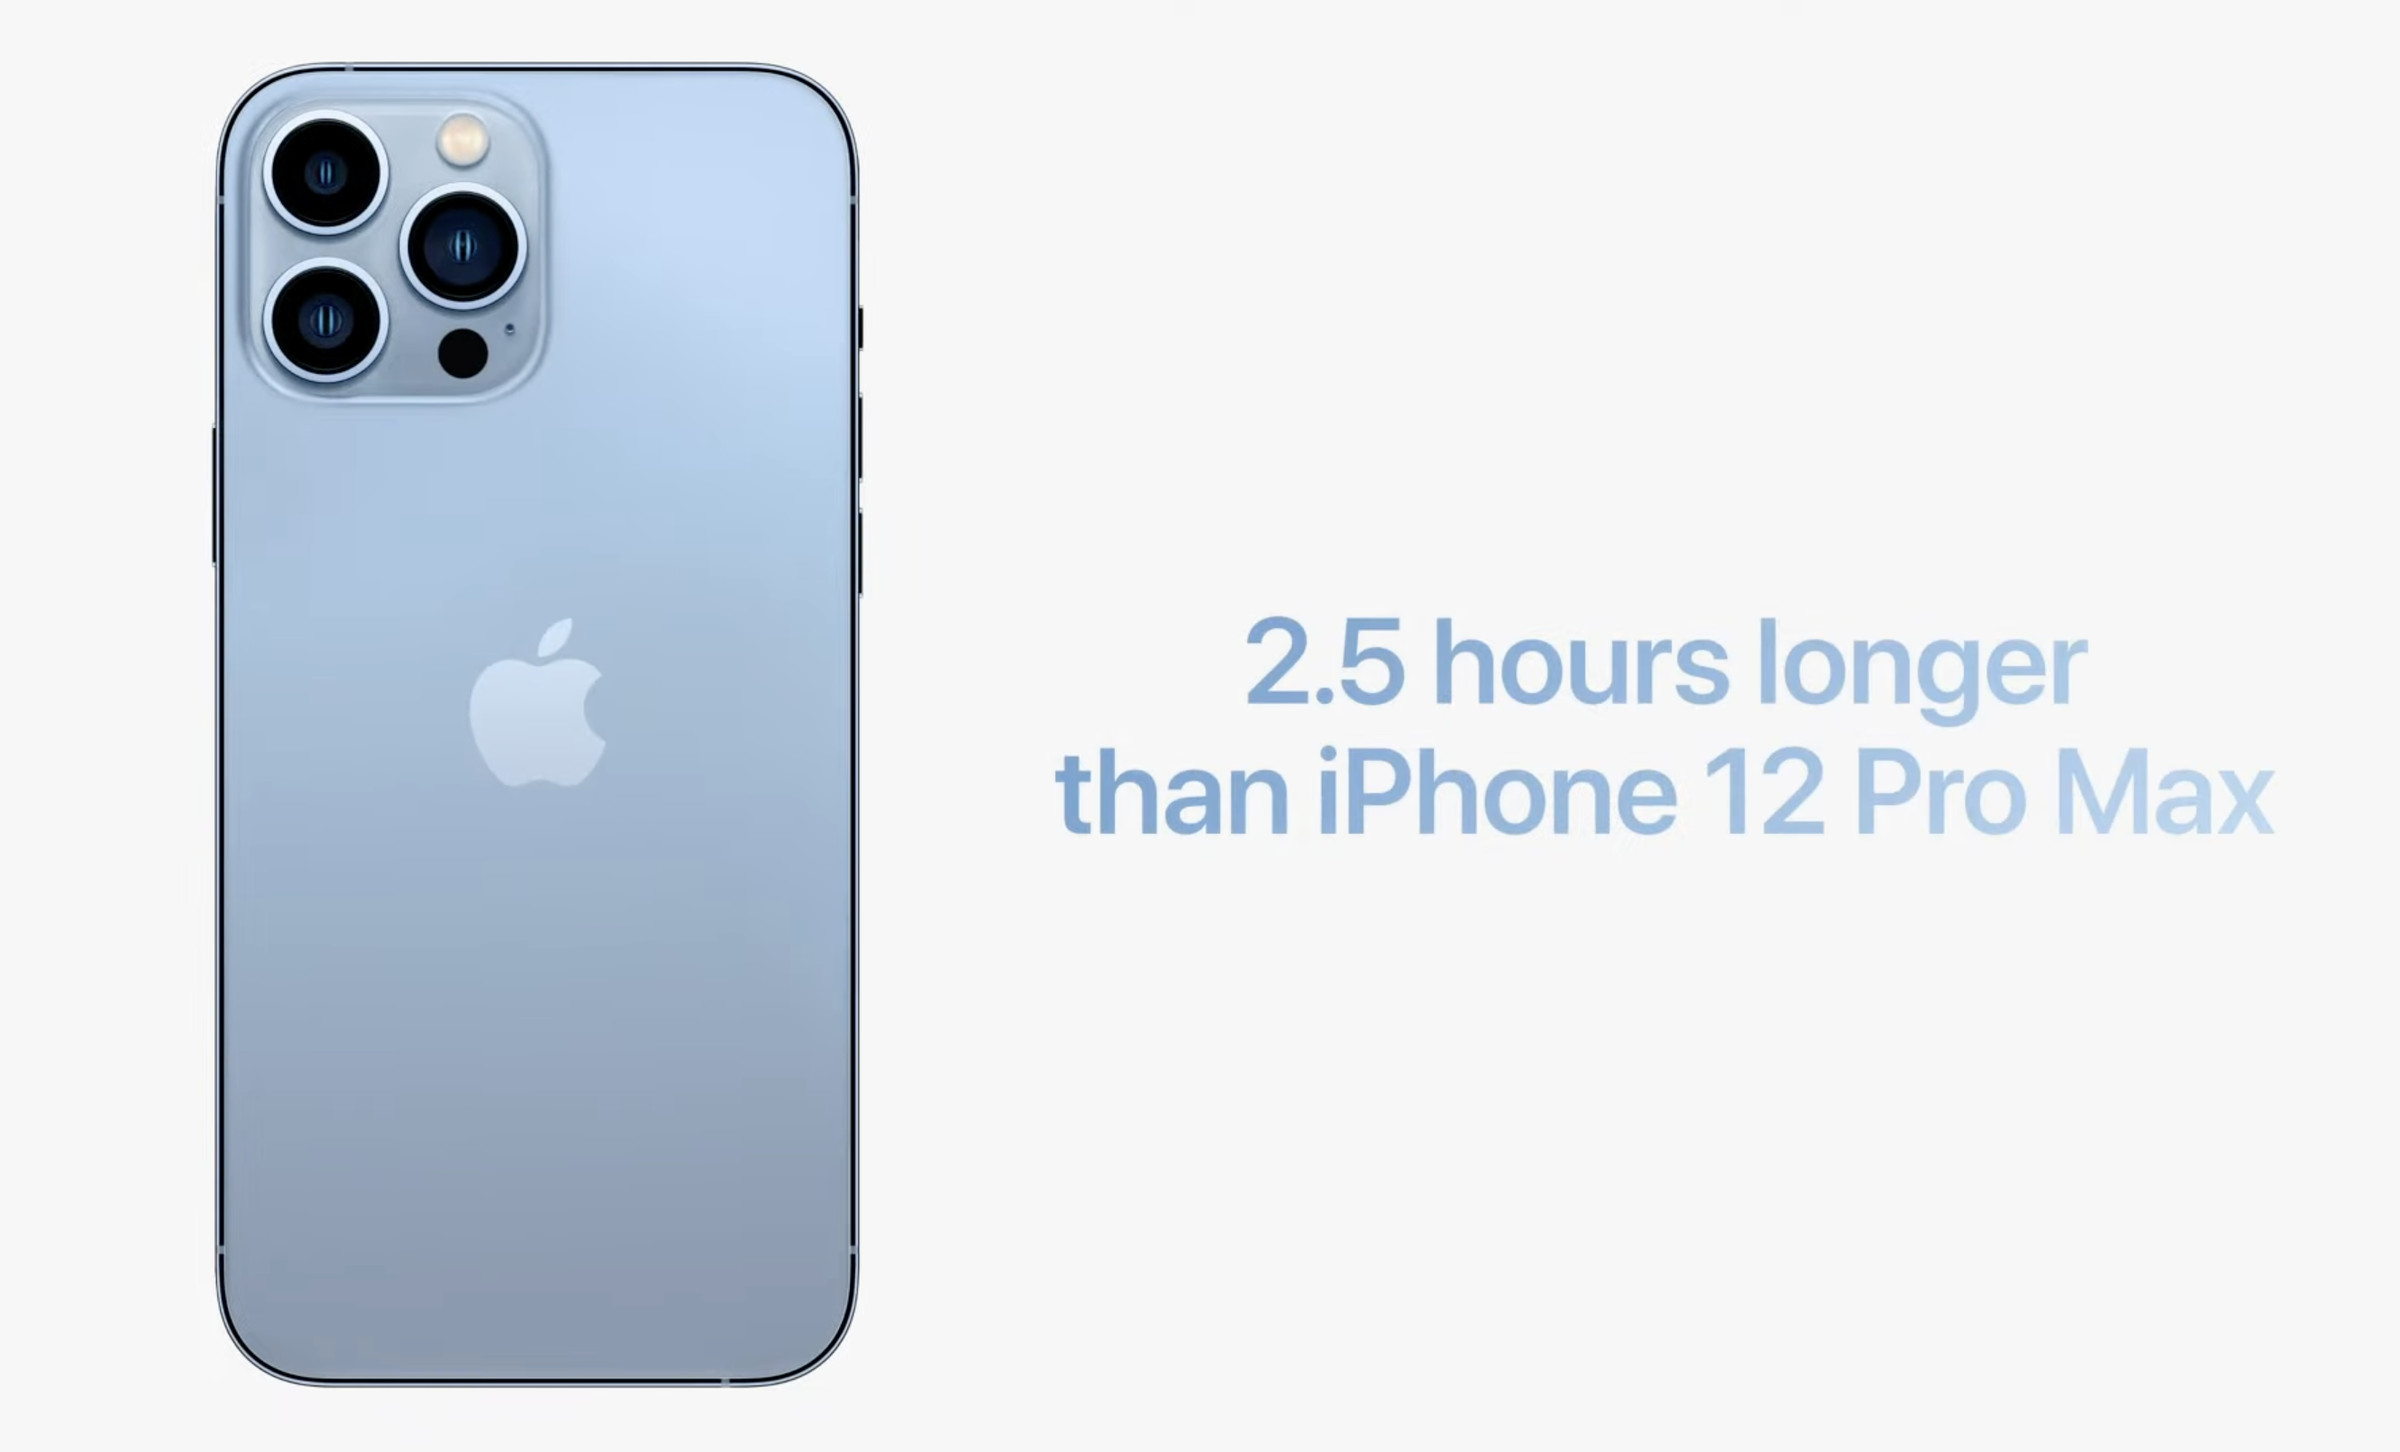 Apple says the iPhone 13 Pro Max will get you 2.5 hours further into your day.